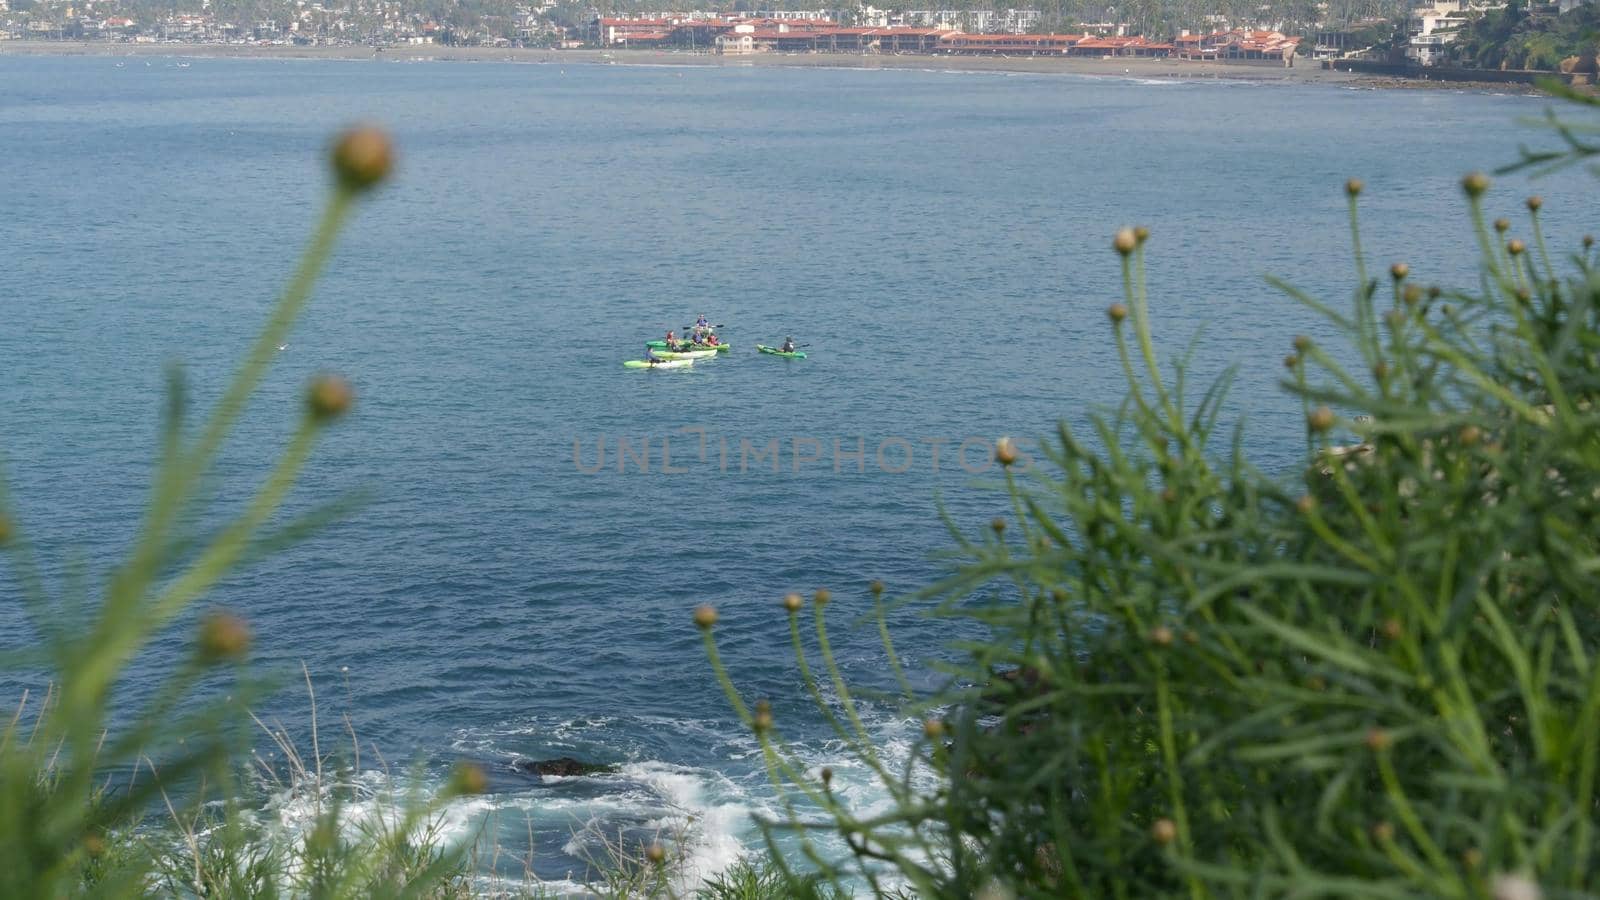 La Jolla, San Diego, CA USA -24 JAN 2020: Group of people on kayaks in ocean, active tourists on canoe paddling and looking for seal. View from steep high cliff. Leisure during vacations and holidays by DogoraSun